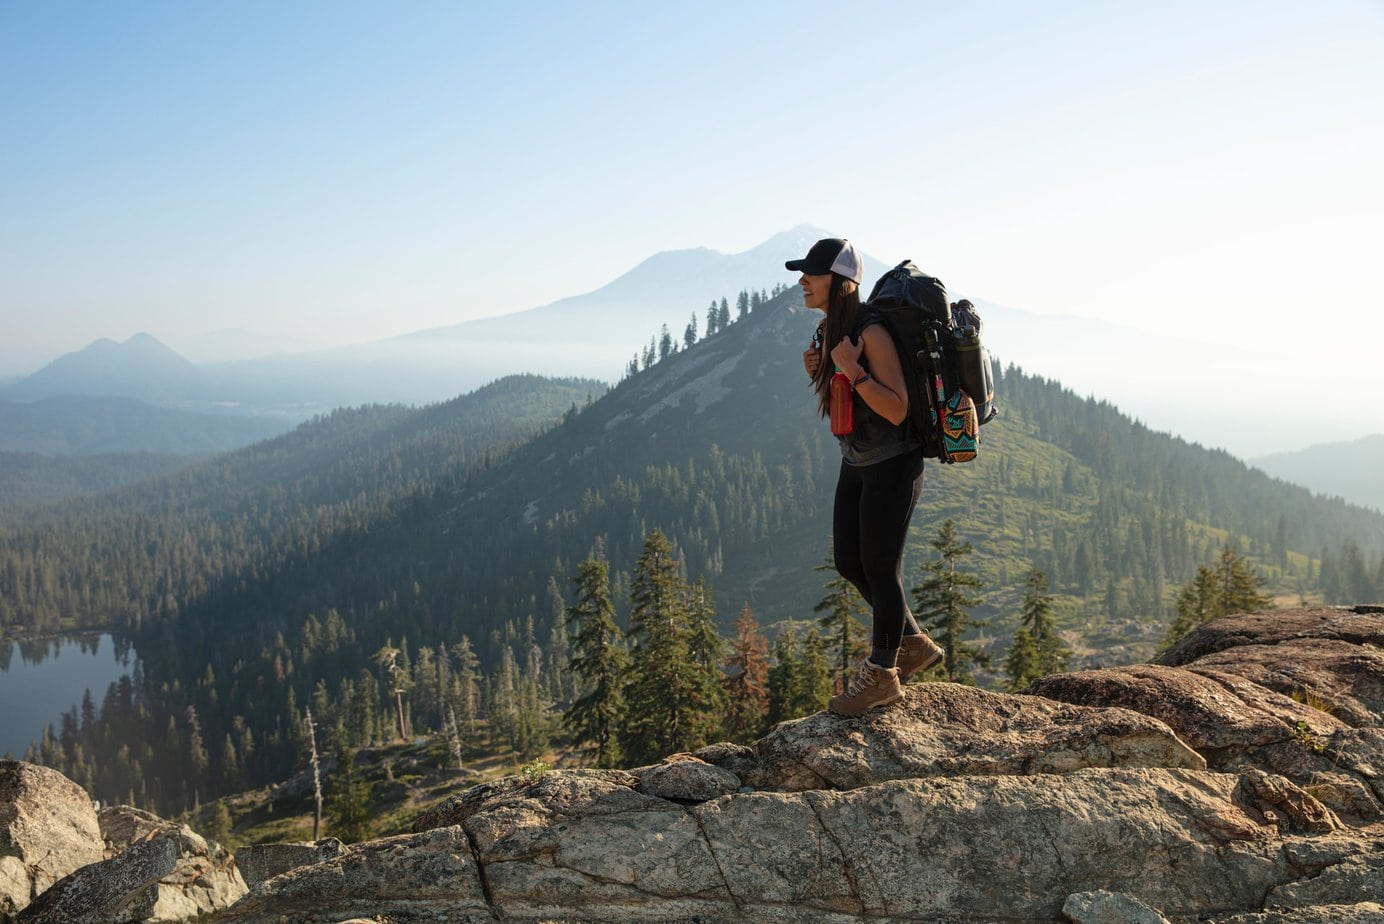 The Best Hiking Apparel to Make Your Next Adventure a Success